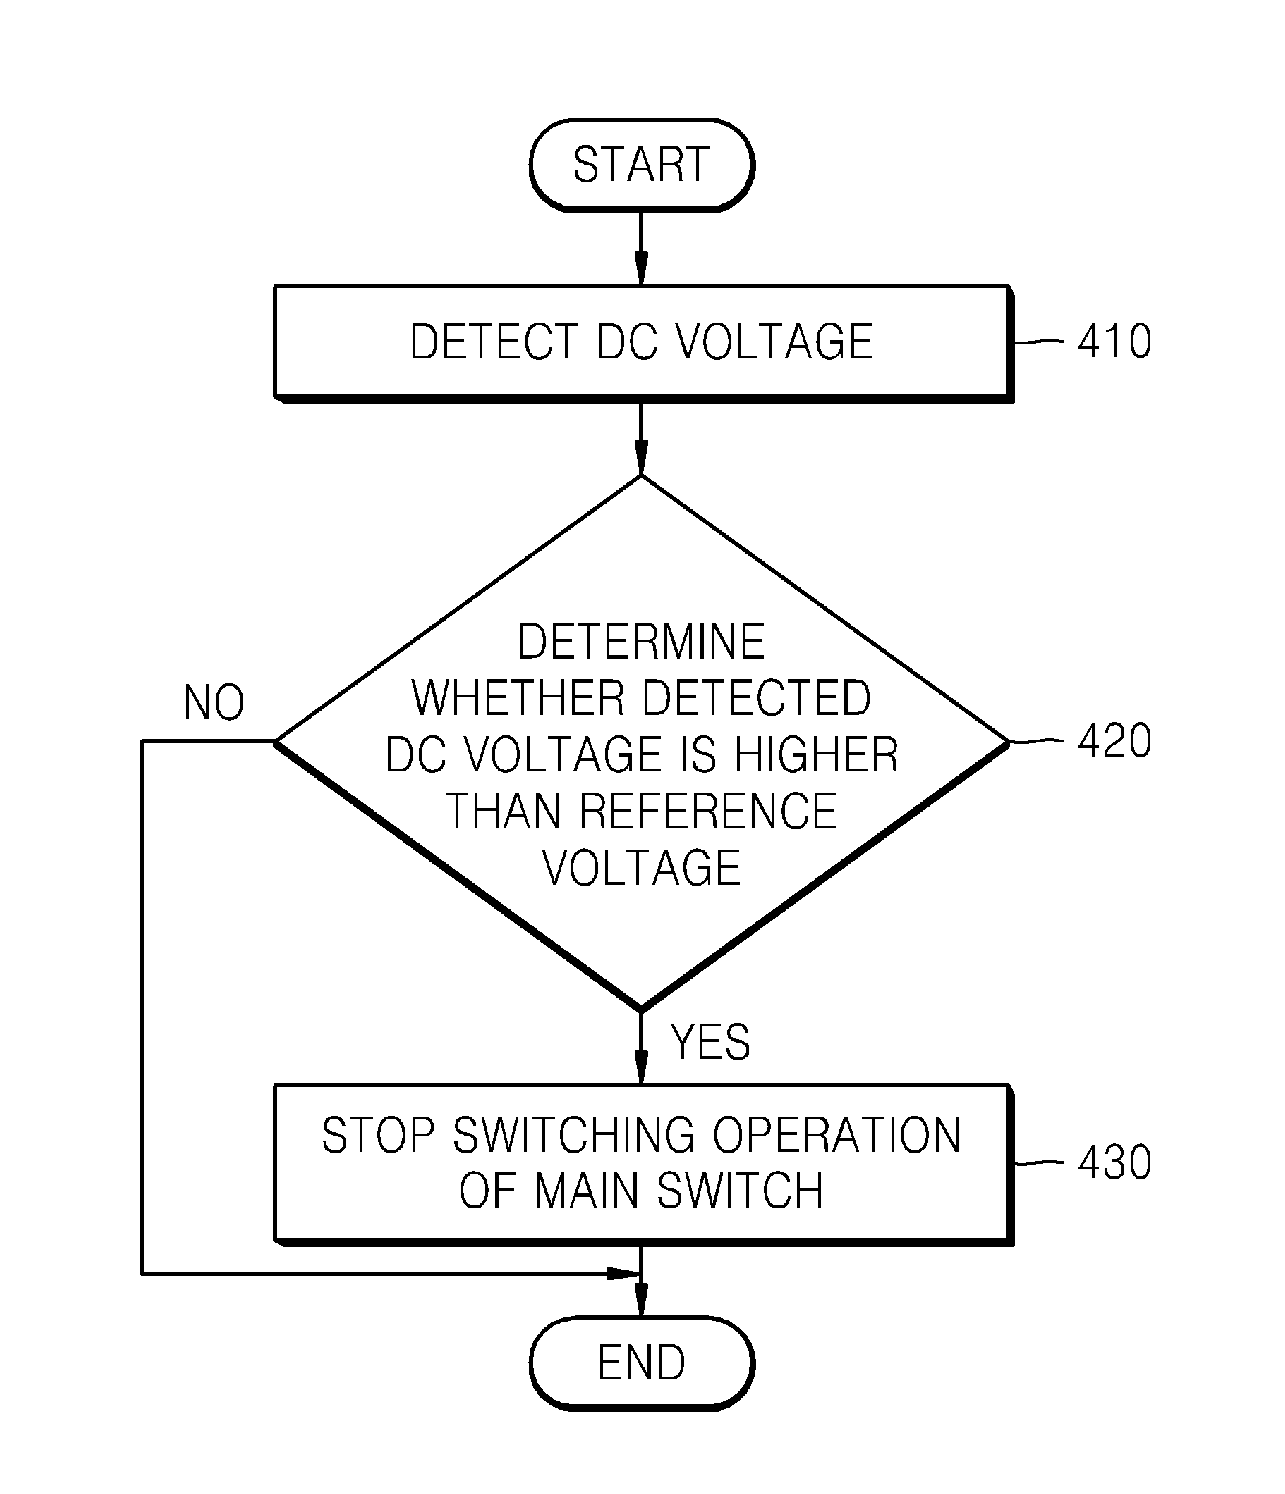 Switching-mode power supply (SMPS) having overvoltage cutoff function, and method of cutting off overvoltage and image forming apparatus using the smps